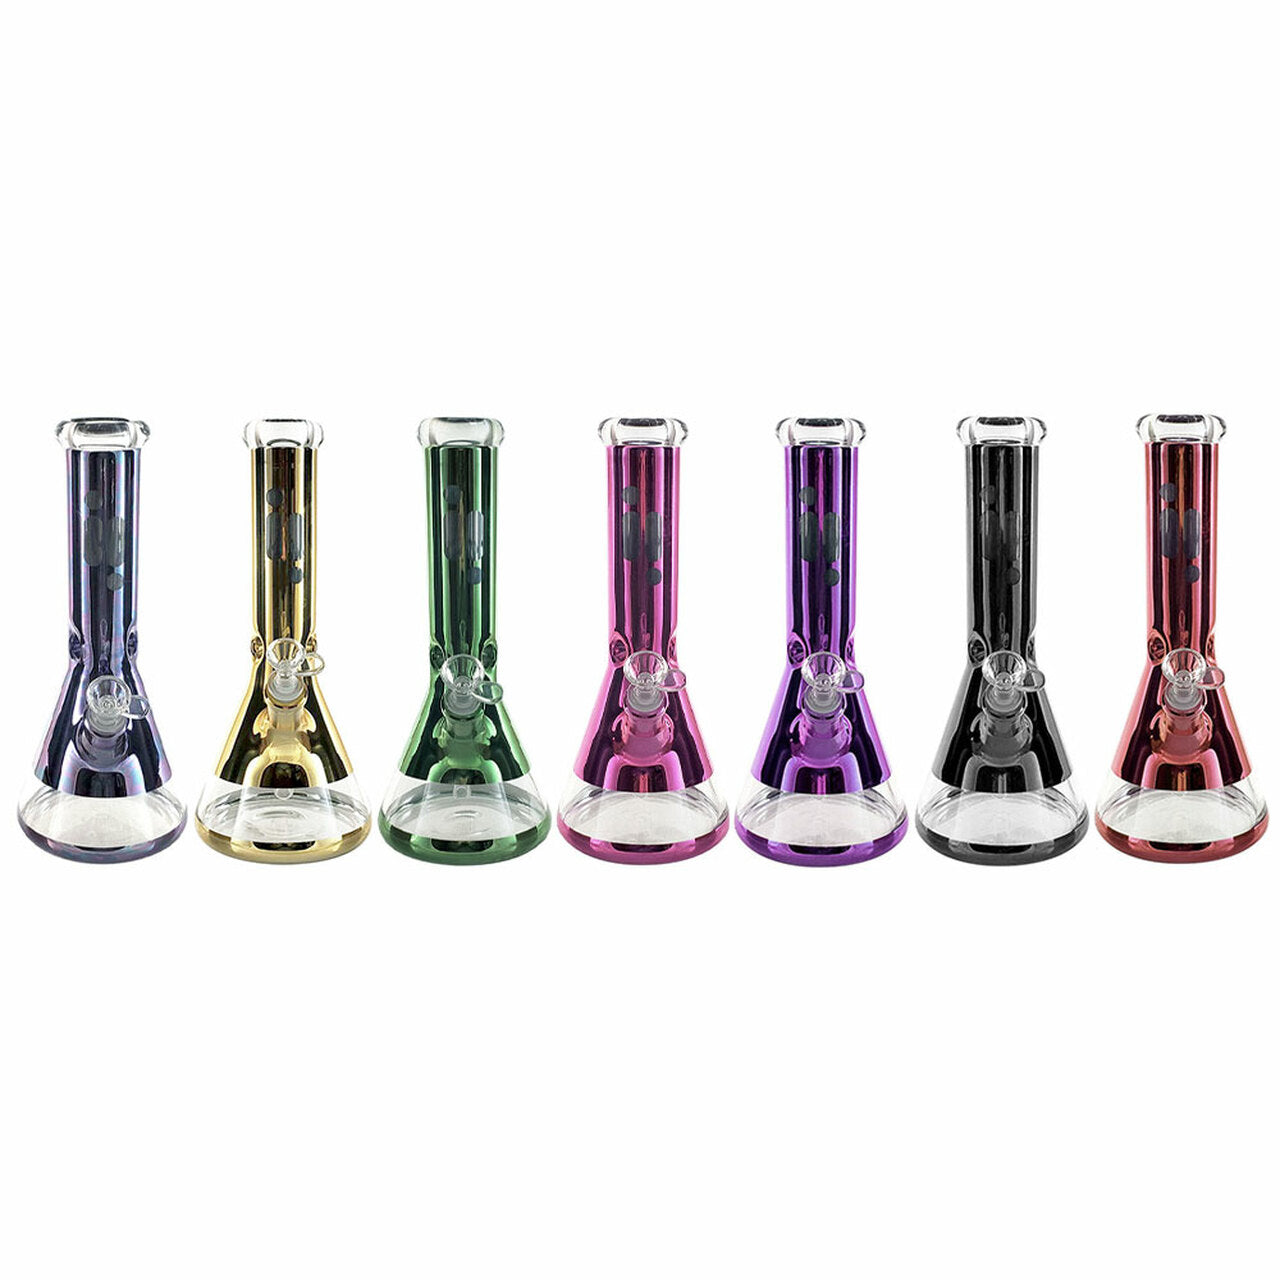 The infyniti Metallic Beaker stands 12 inches tall and features a glass body that looks nothing short of majestic. The 7 mm metallic beaker water pipe is a beauty to behold complete with a 14mm bowl and a 14mm downstem. Please note that colours may vary from images.